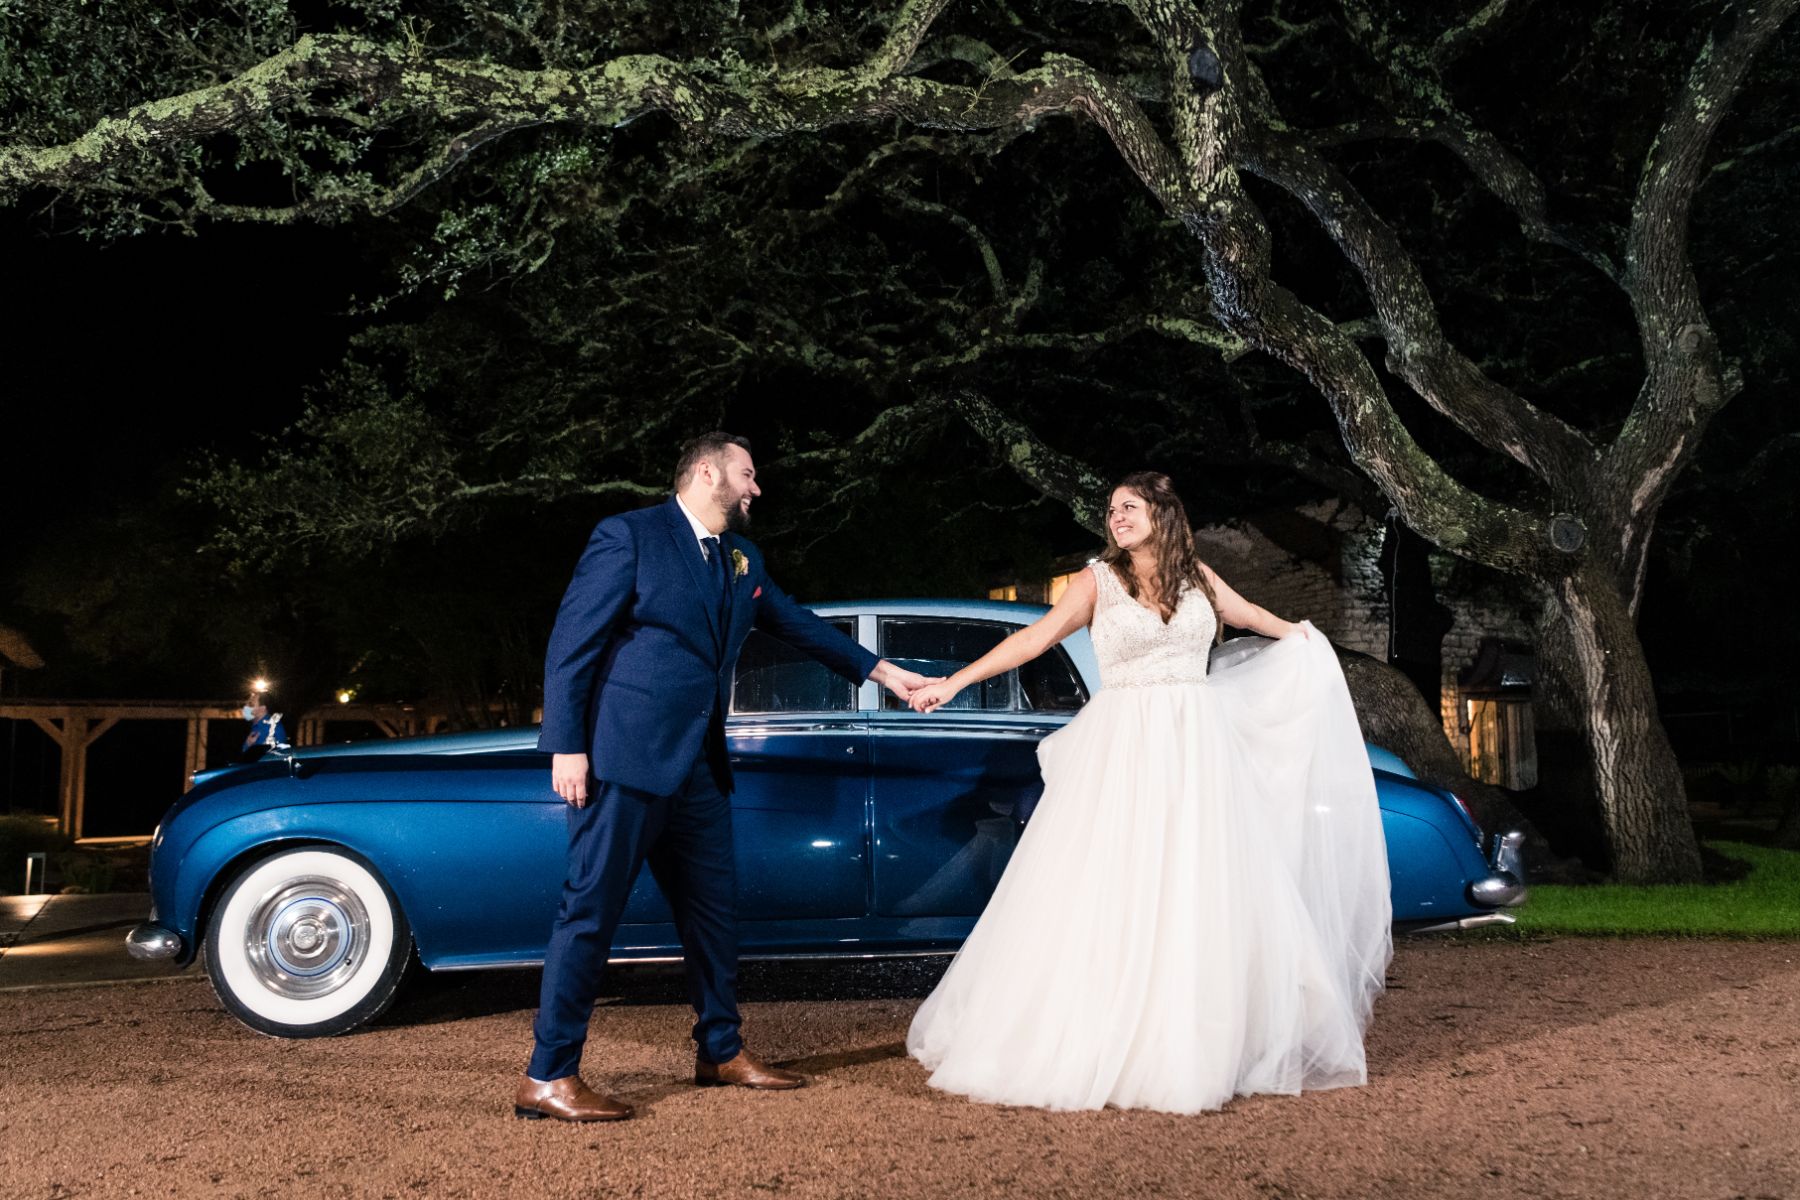 Bride and groom, hold hands in front of a luxury blue car.